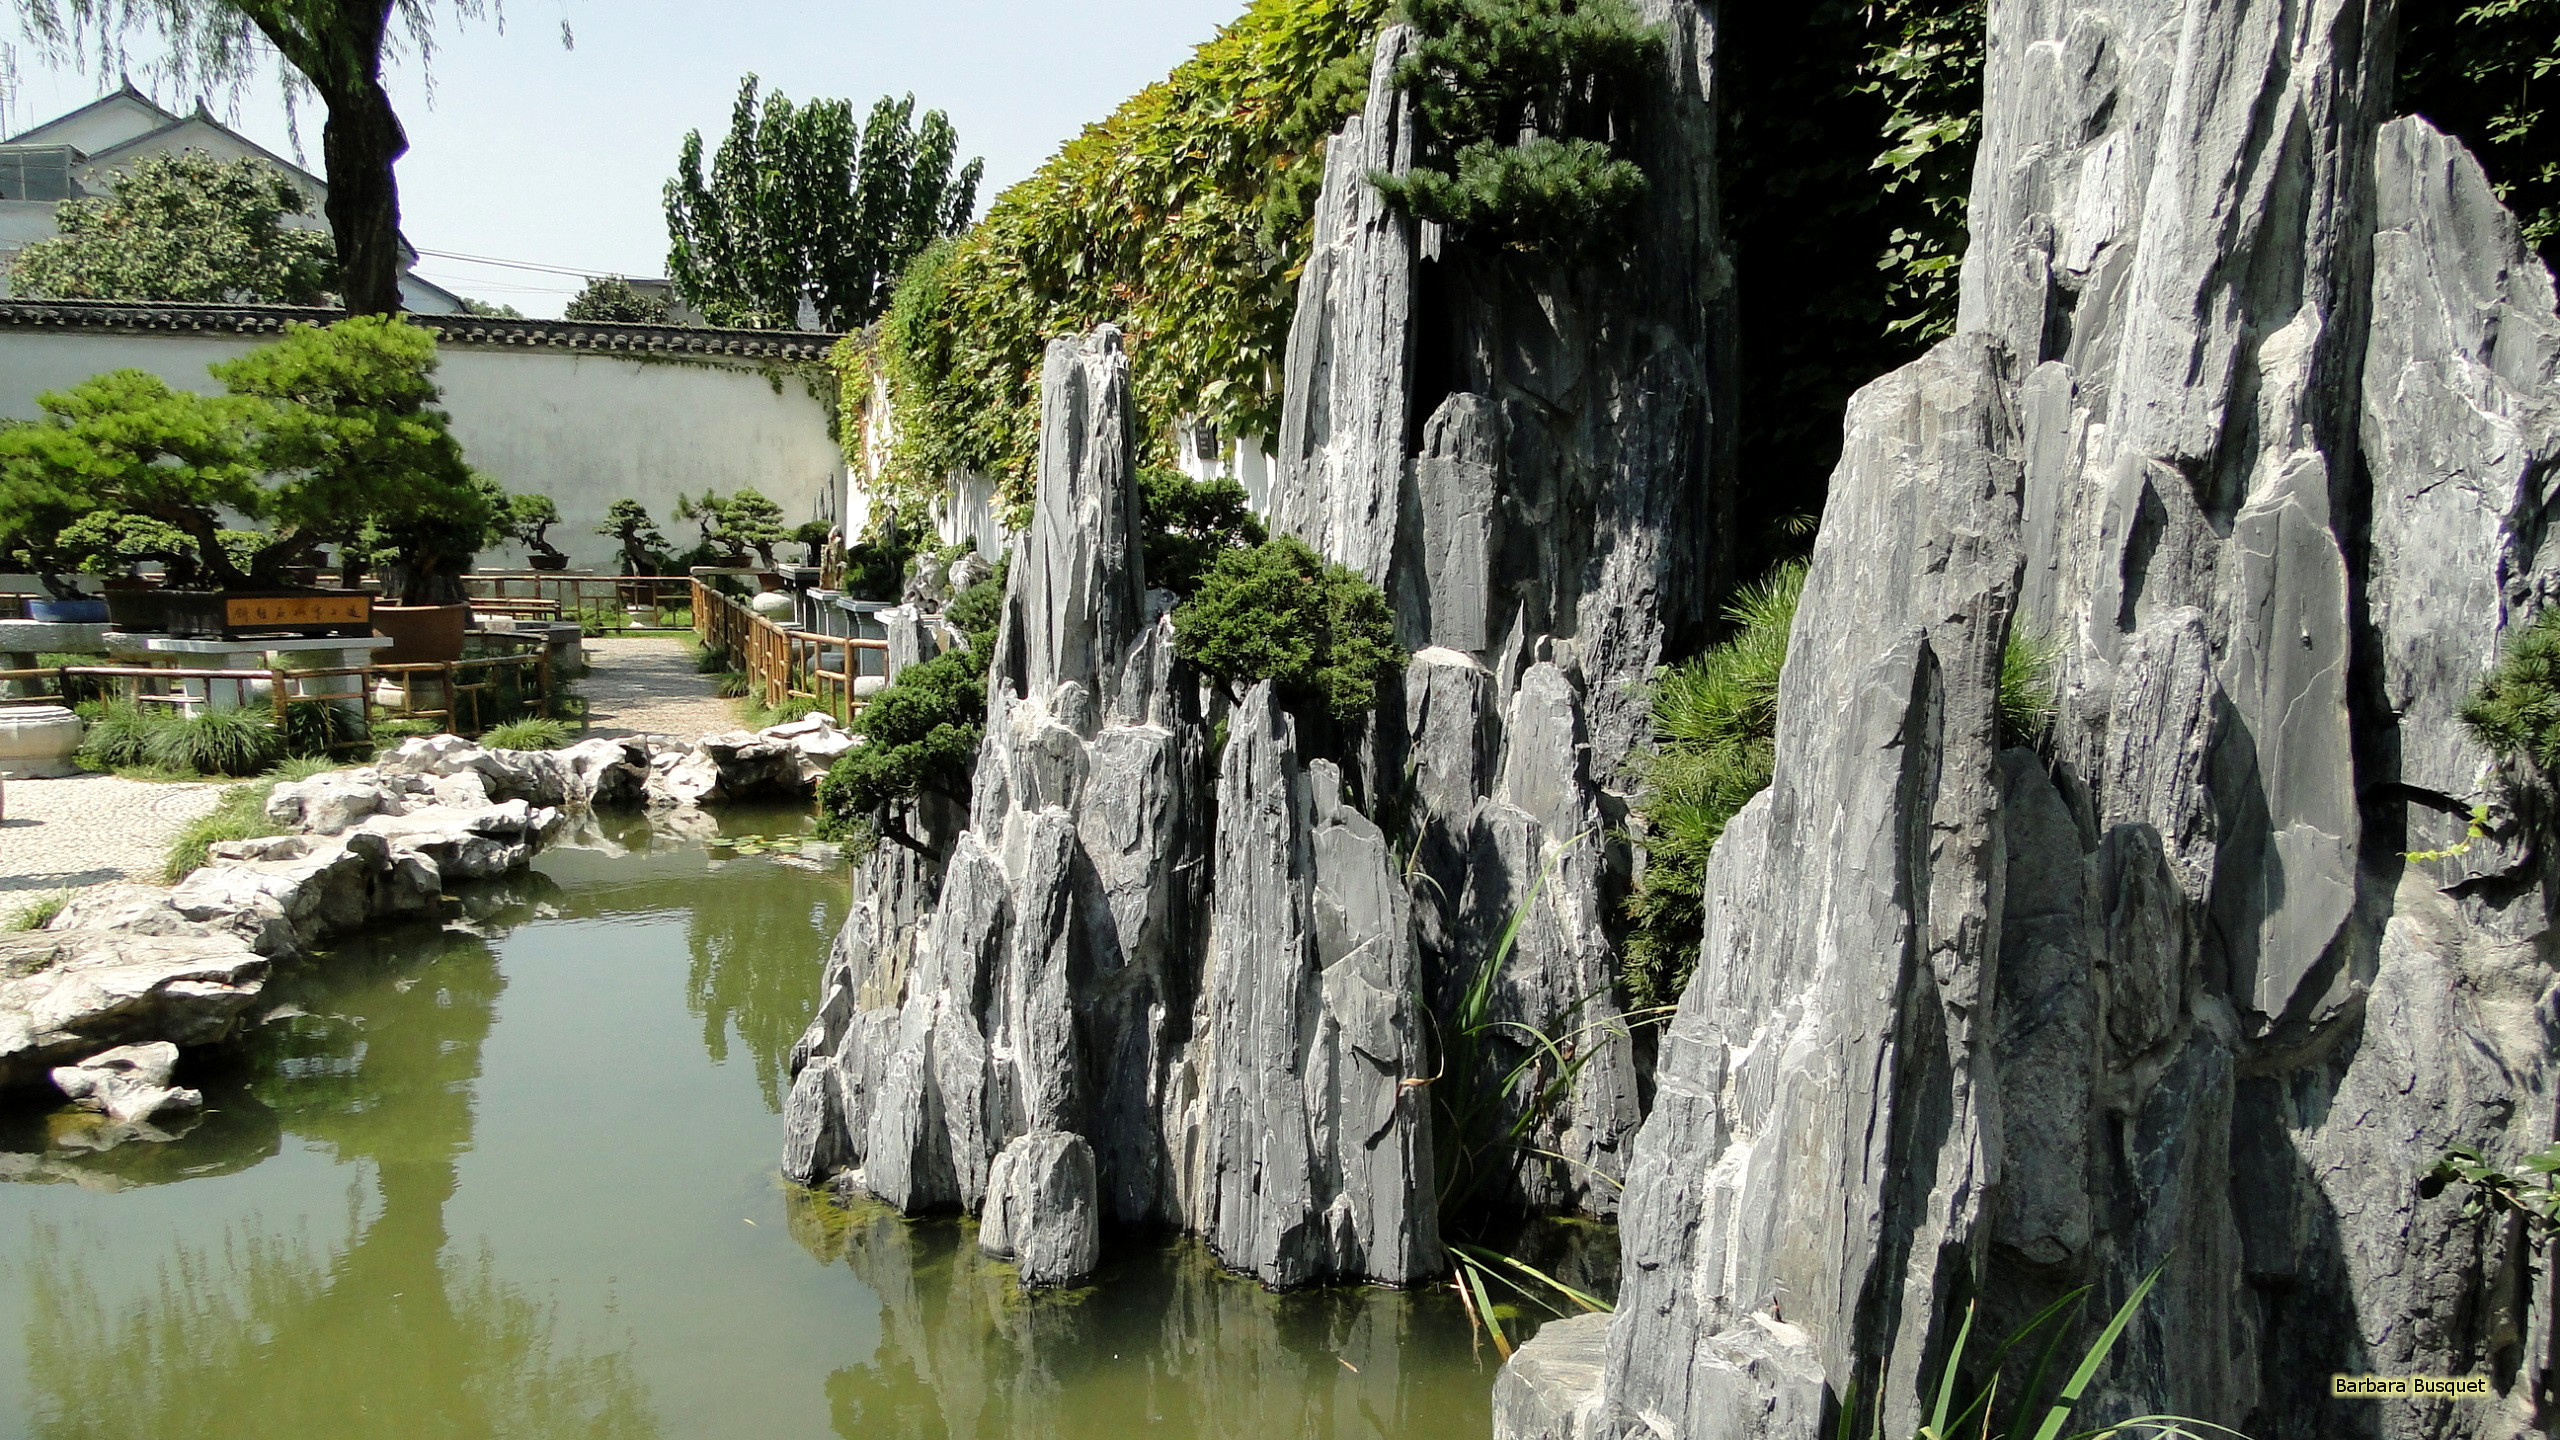 Chinese Garden Wallpapers